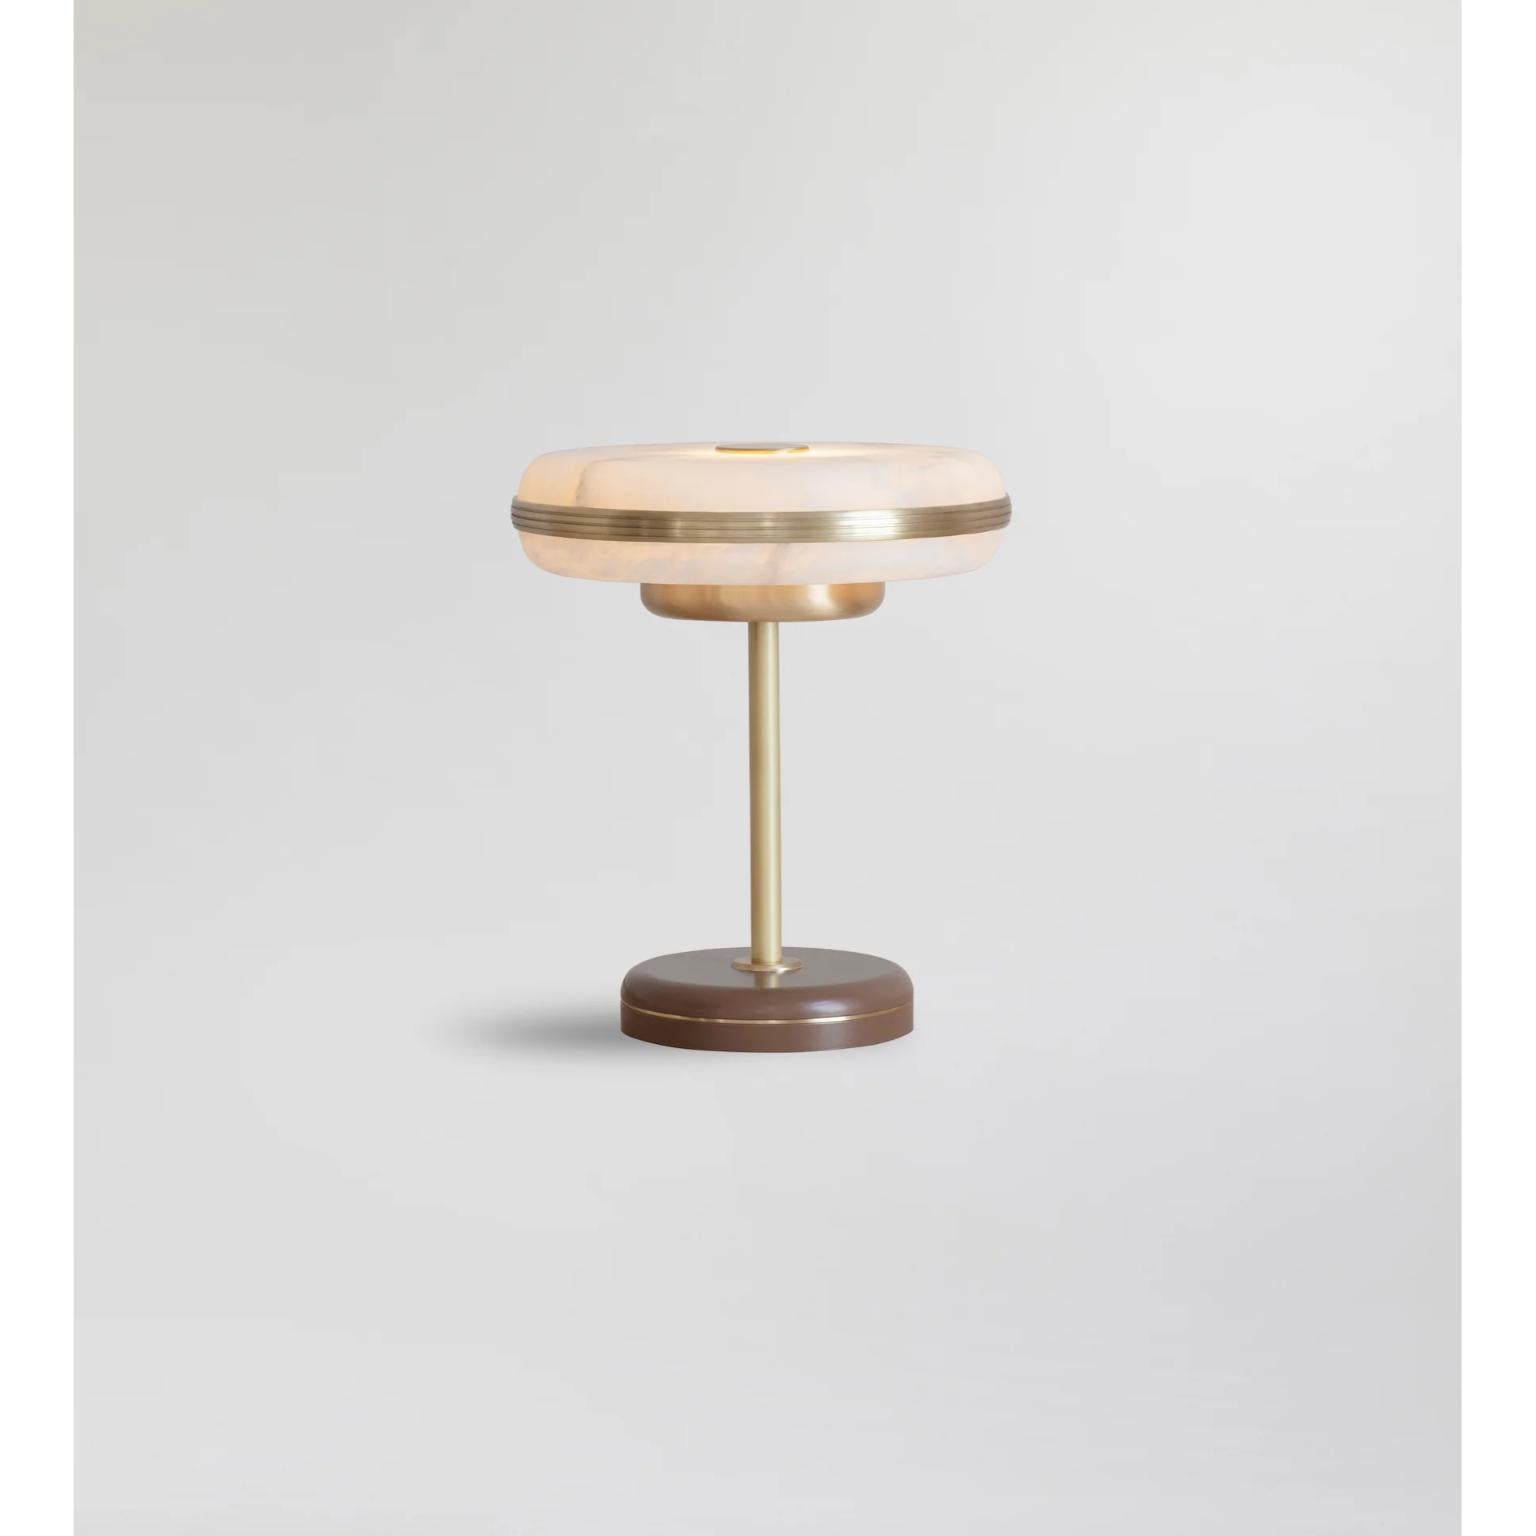 Beran Brushed Brass Small Table Lamp by Bert Frank
Dimensions: Ø 26 x H 28 cm.
Materials: Brass and alabaster.
Base finish: Hazel.

Available in two different sizes. Available in different finishes and materials. Please contact us. 

The natural